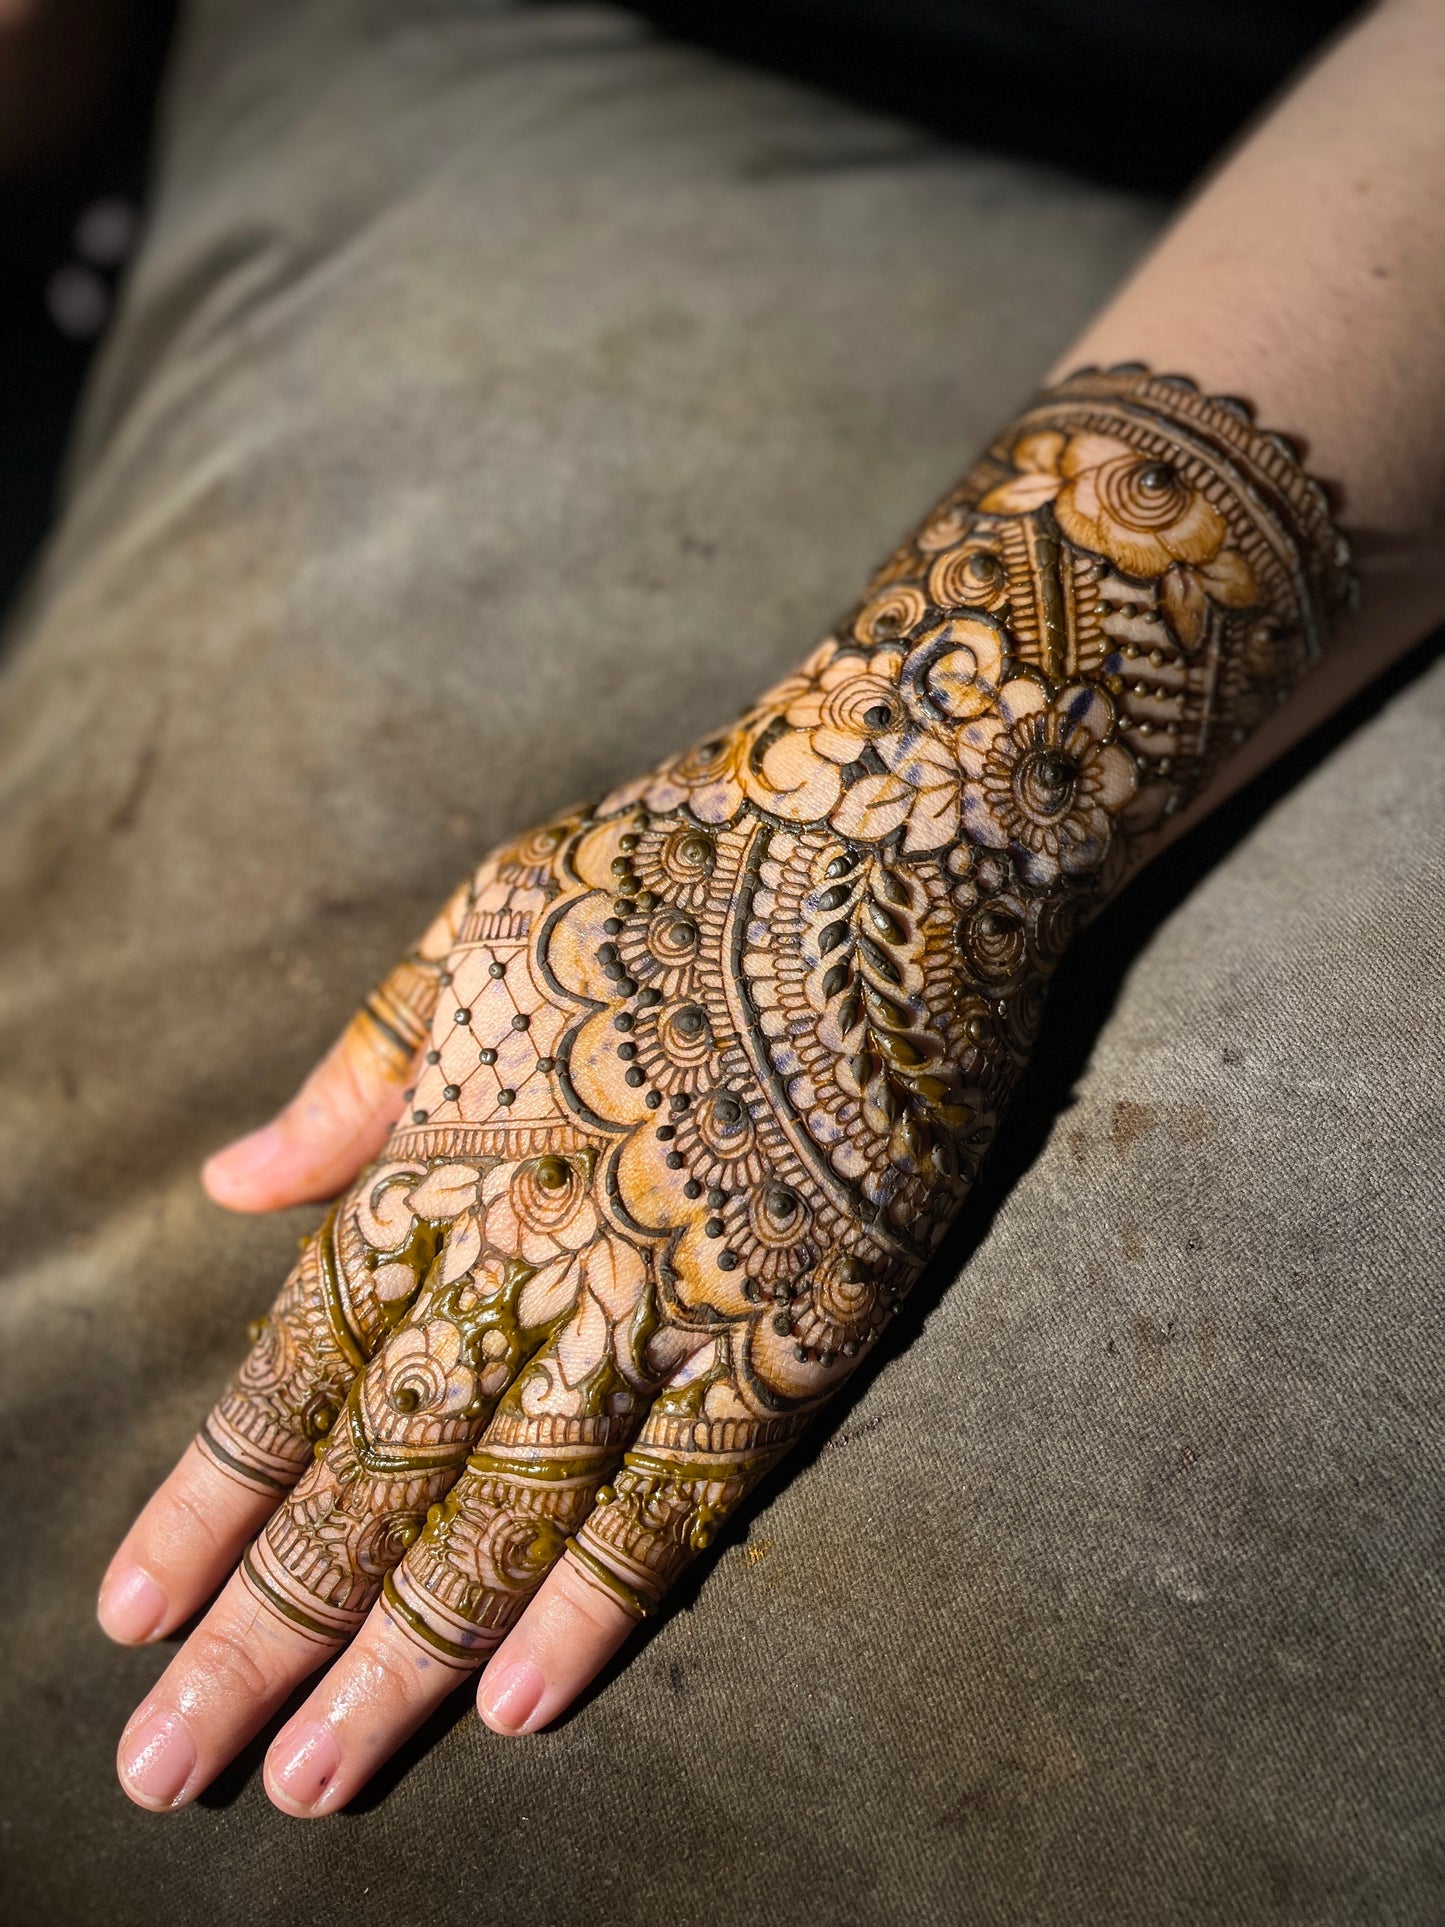 Hands & Feet: Intricate Above Mid Arm